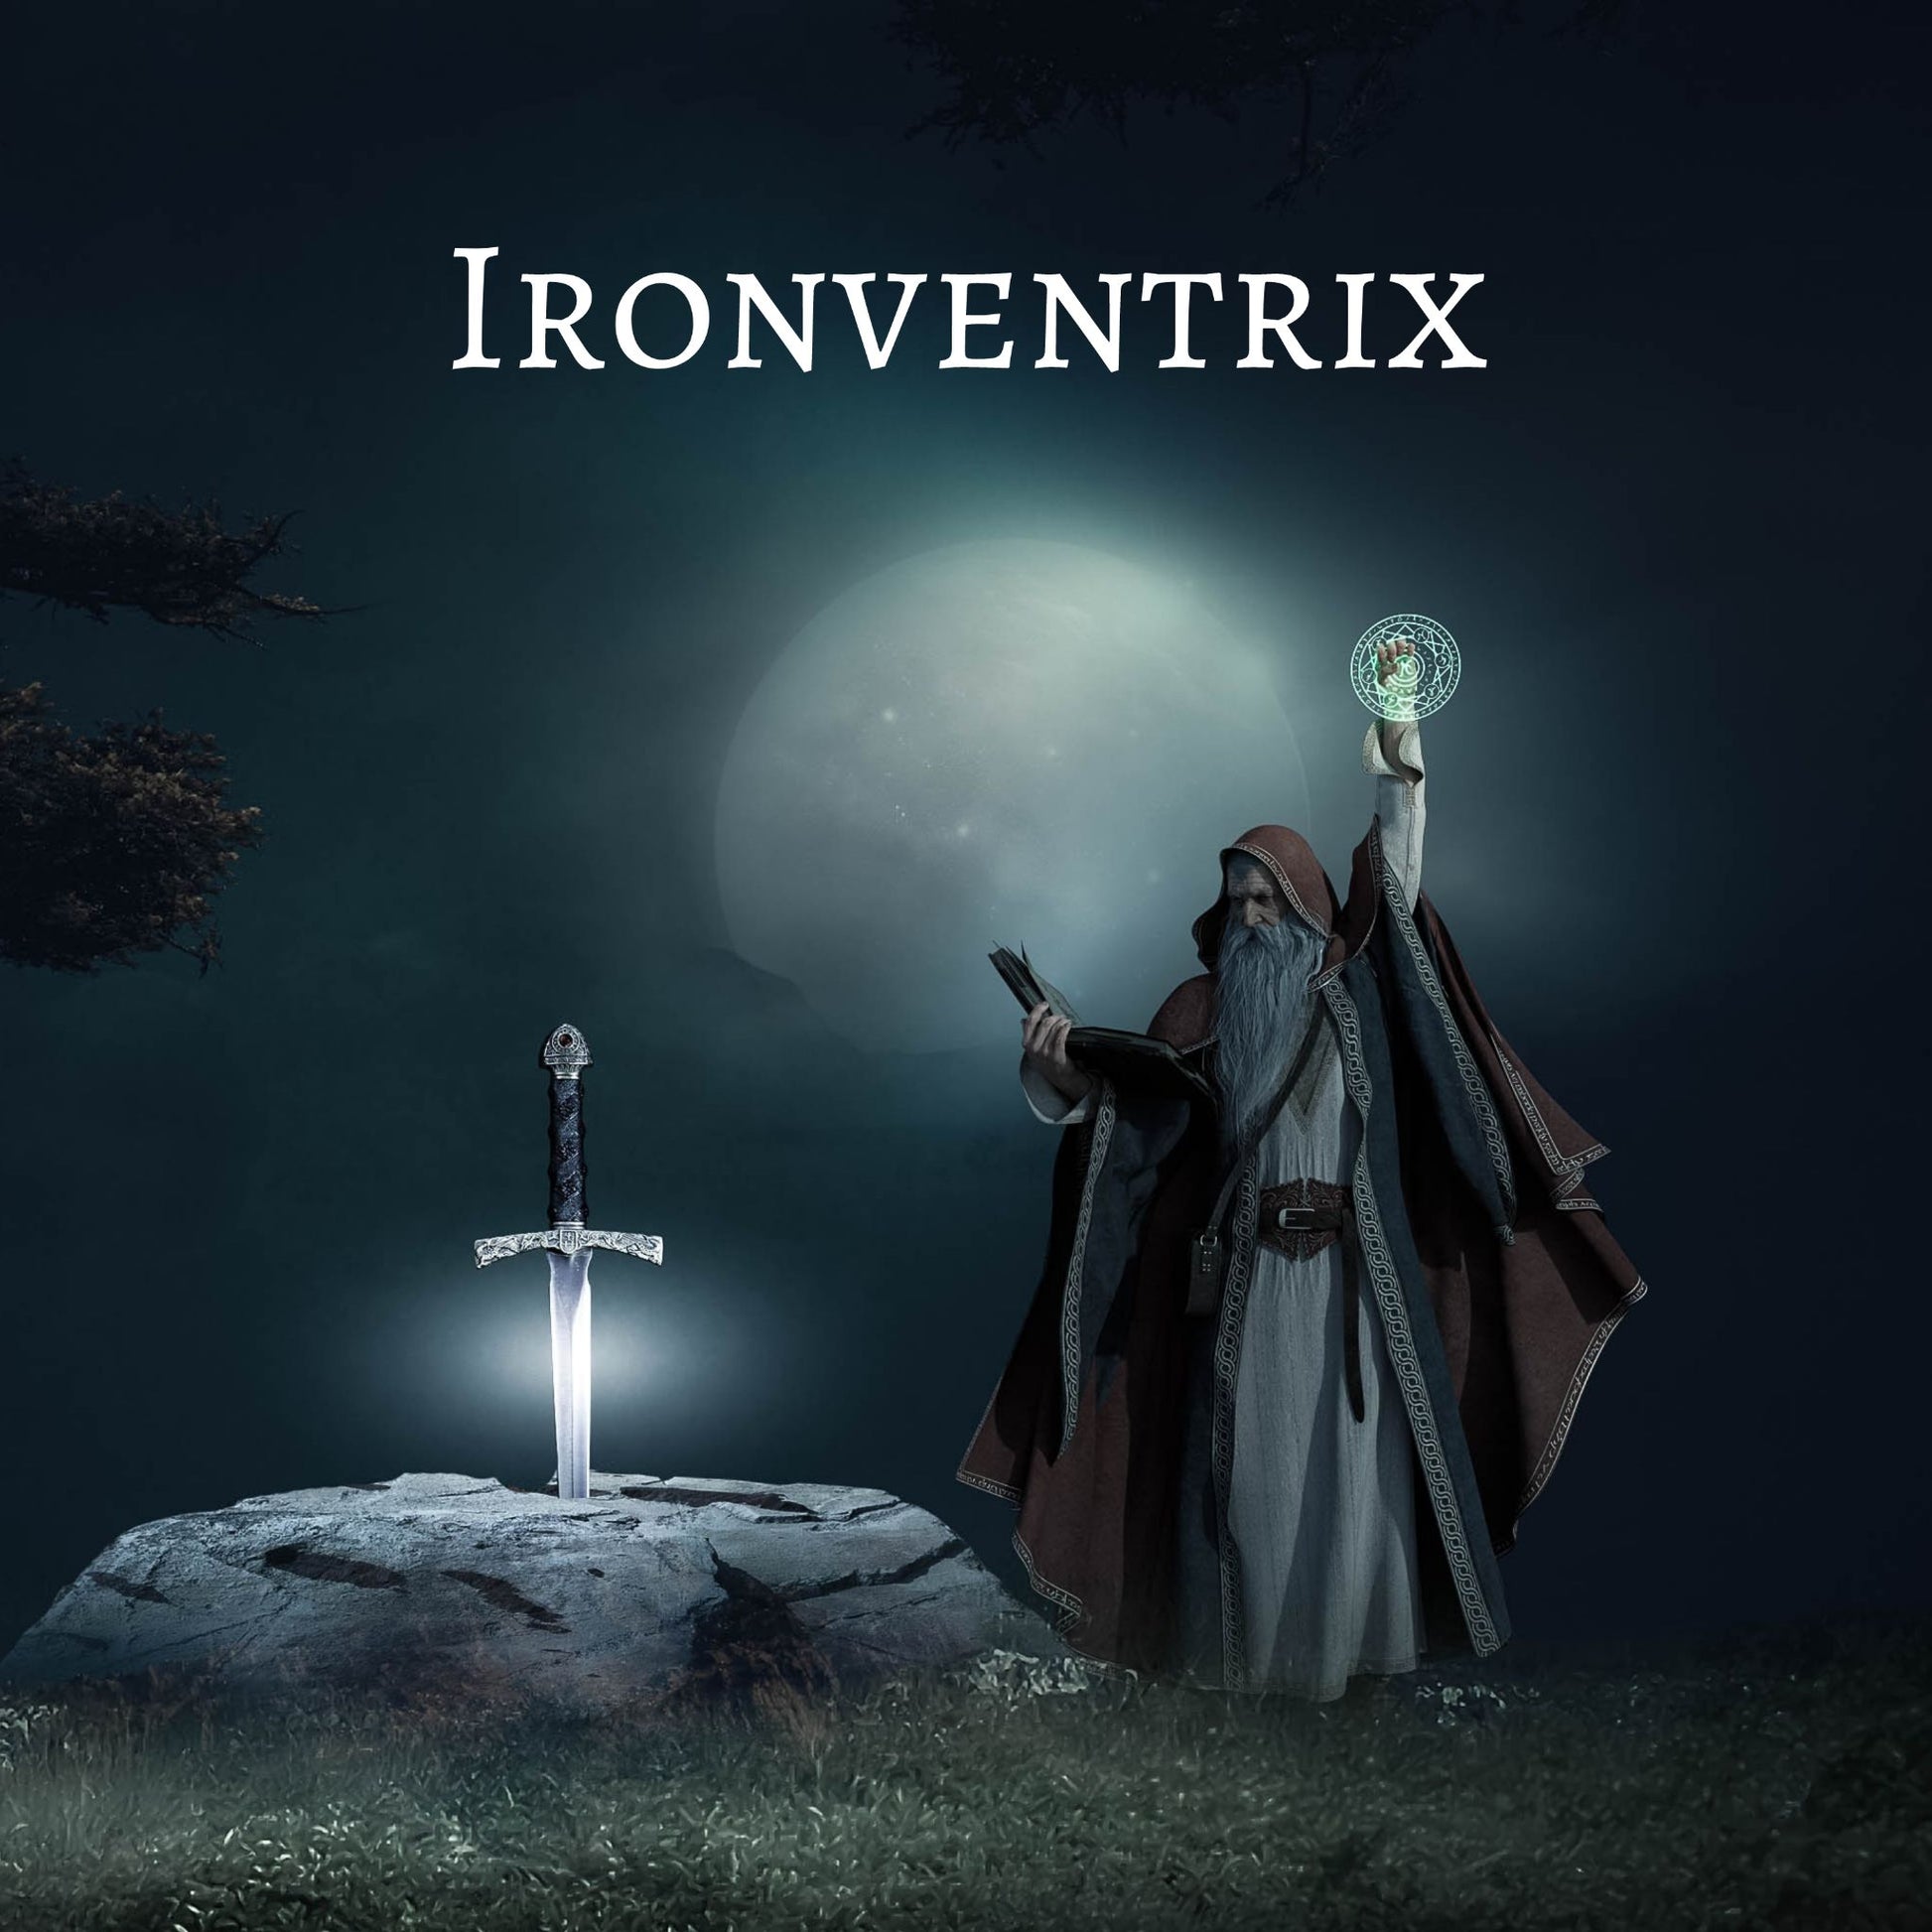 CD Cover of song Ironventrix